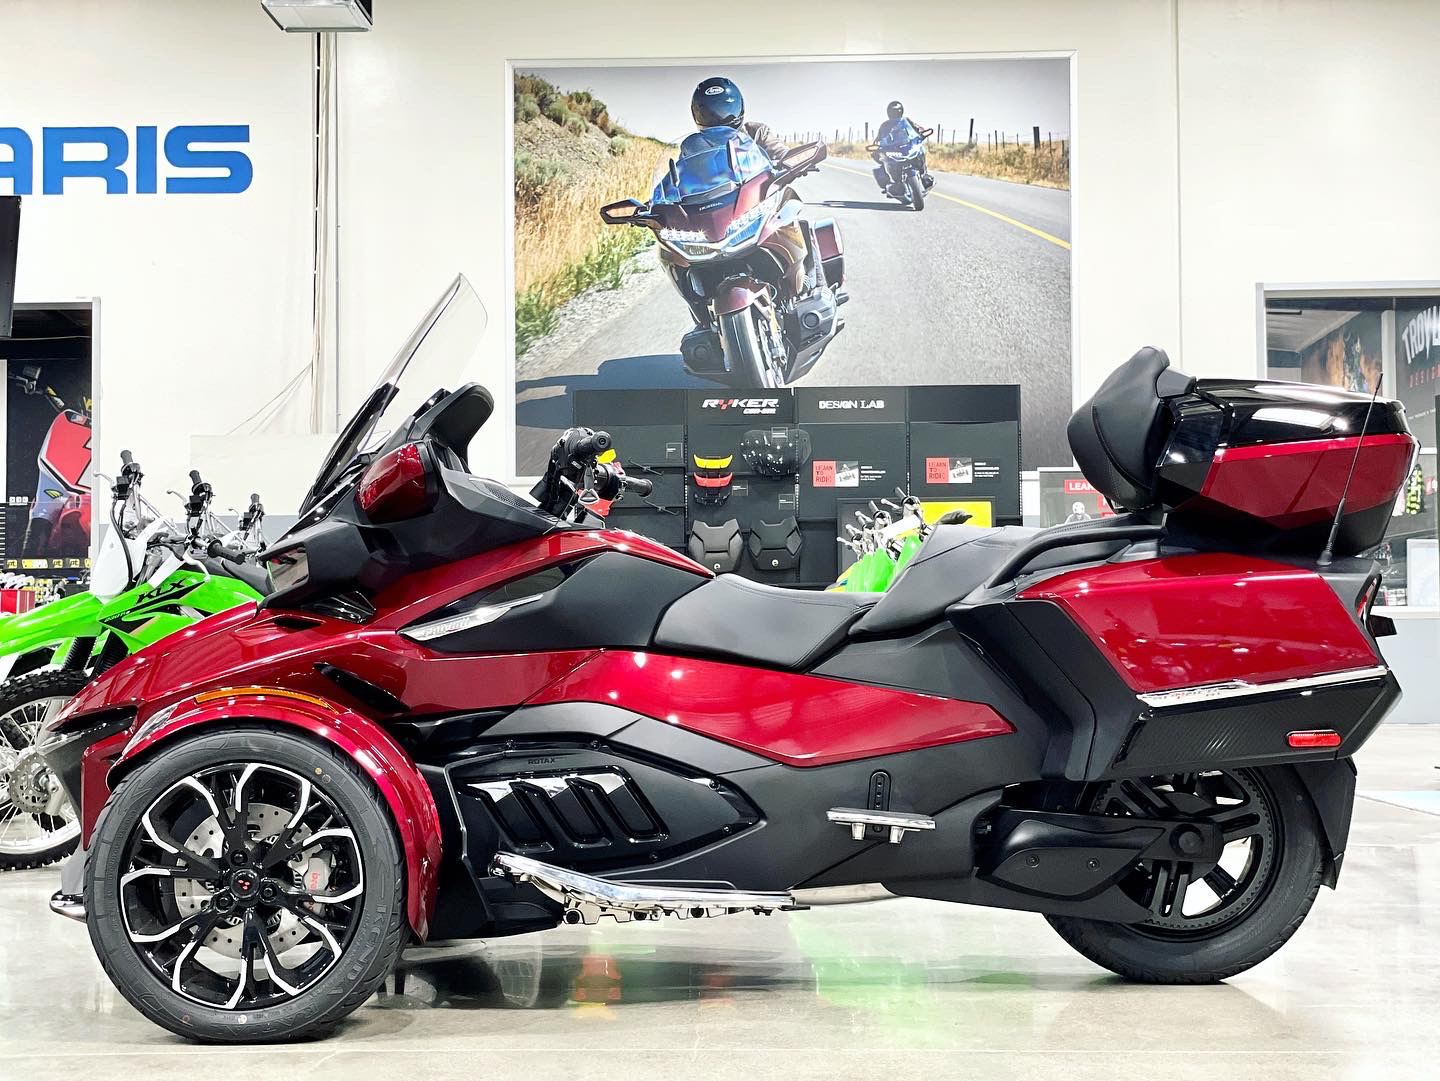 2022 Can-Am Spyder RT Limited in Corona, California - Photo 4